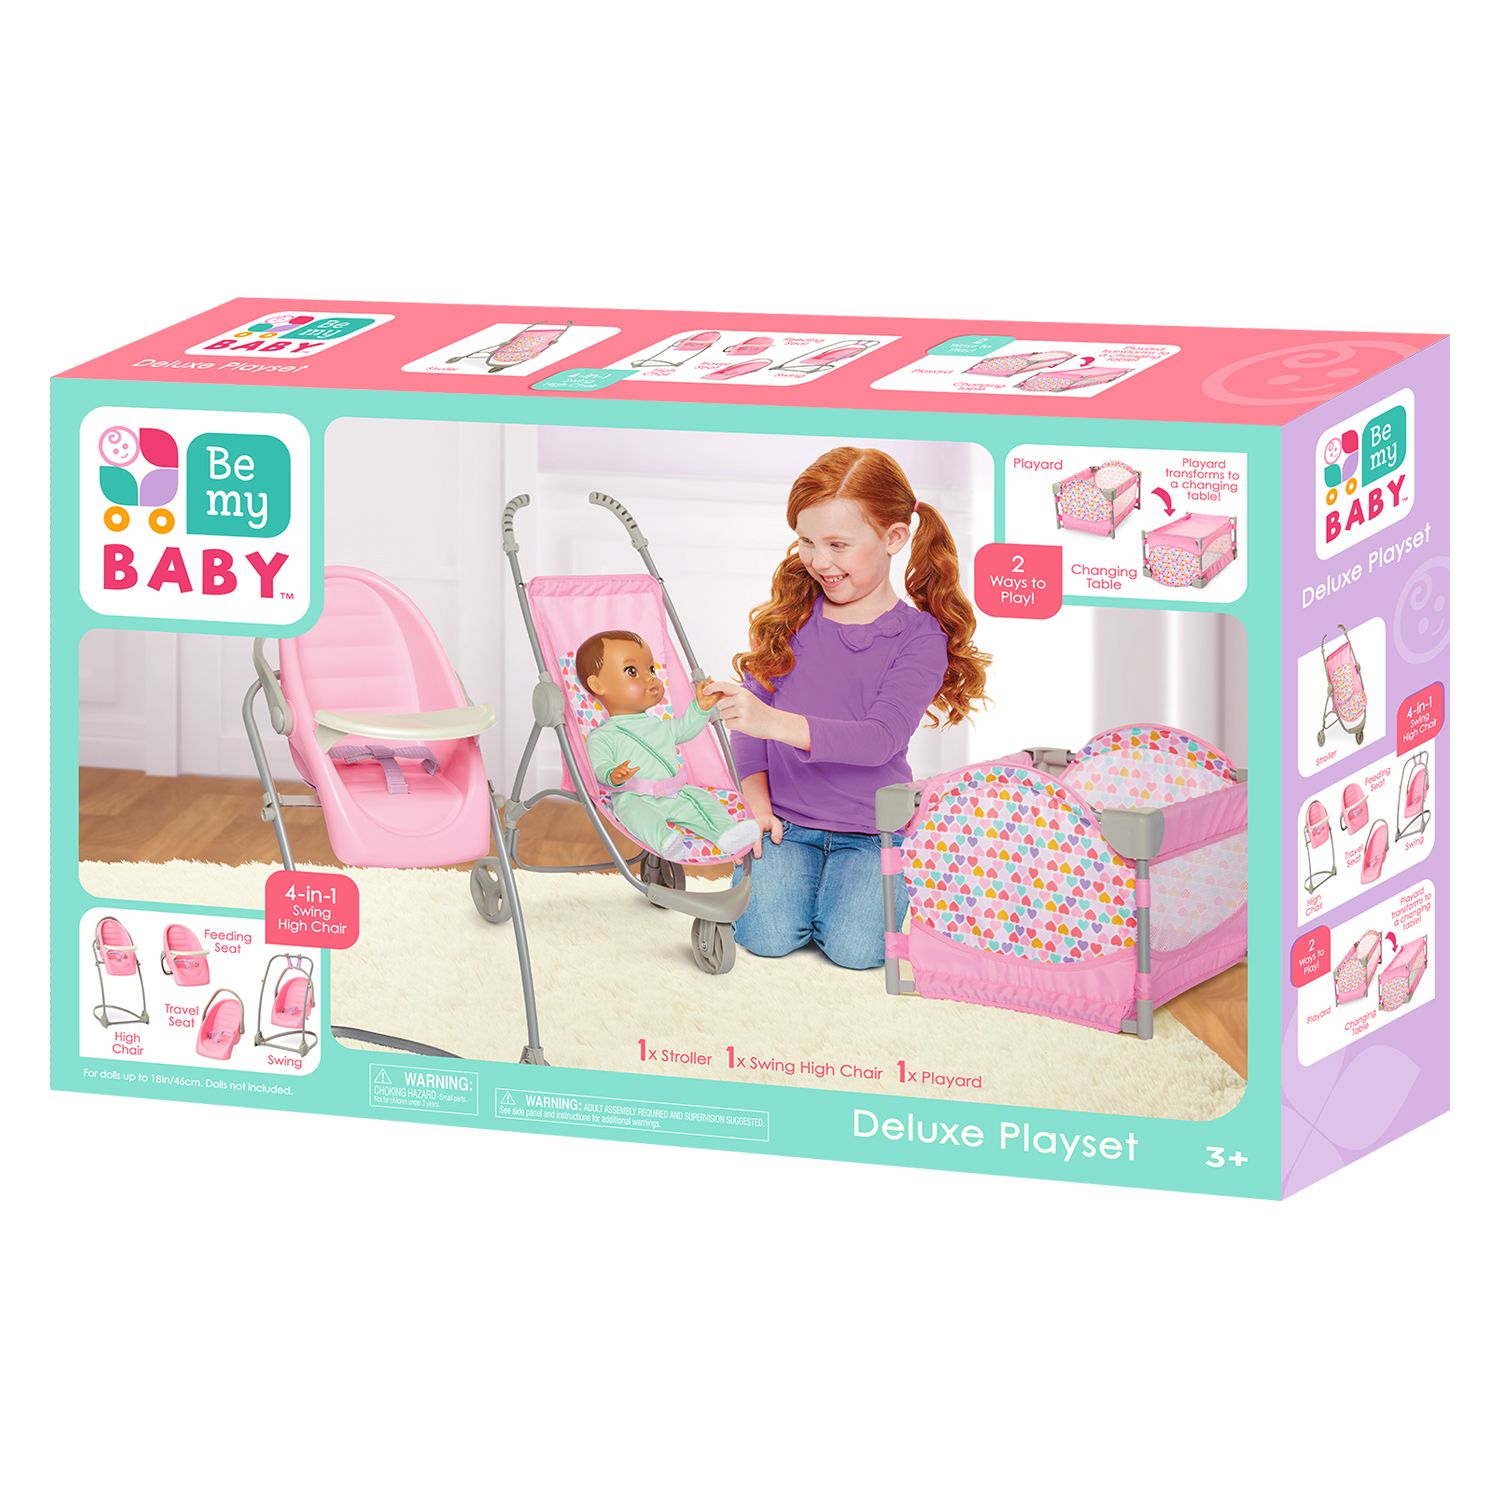 deluxe baby doll set